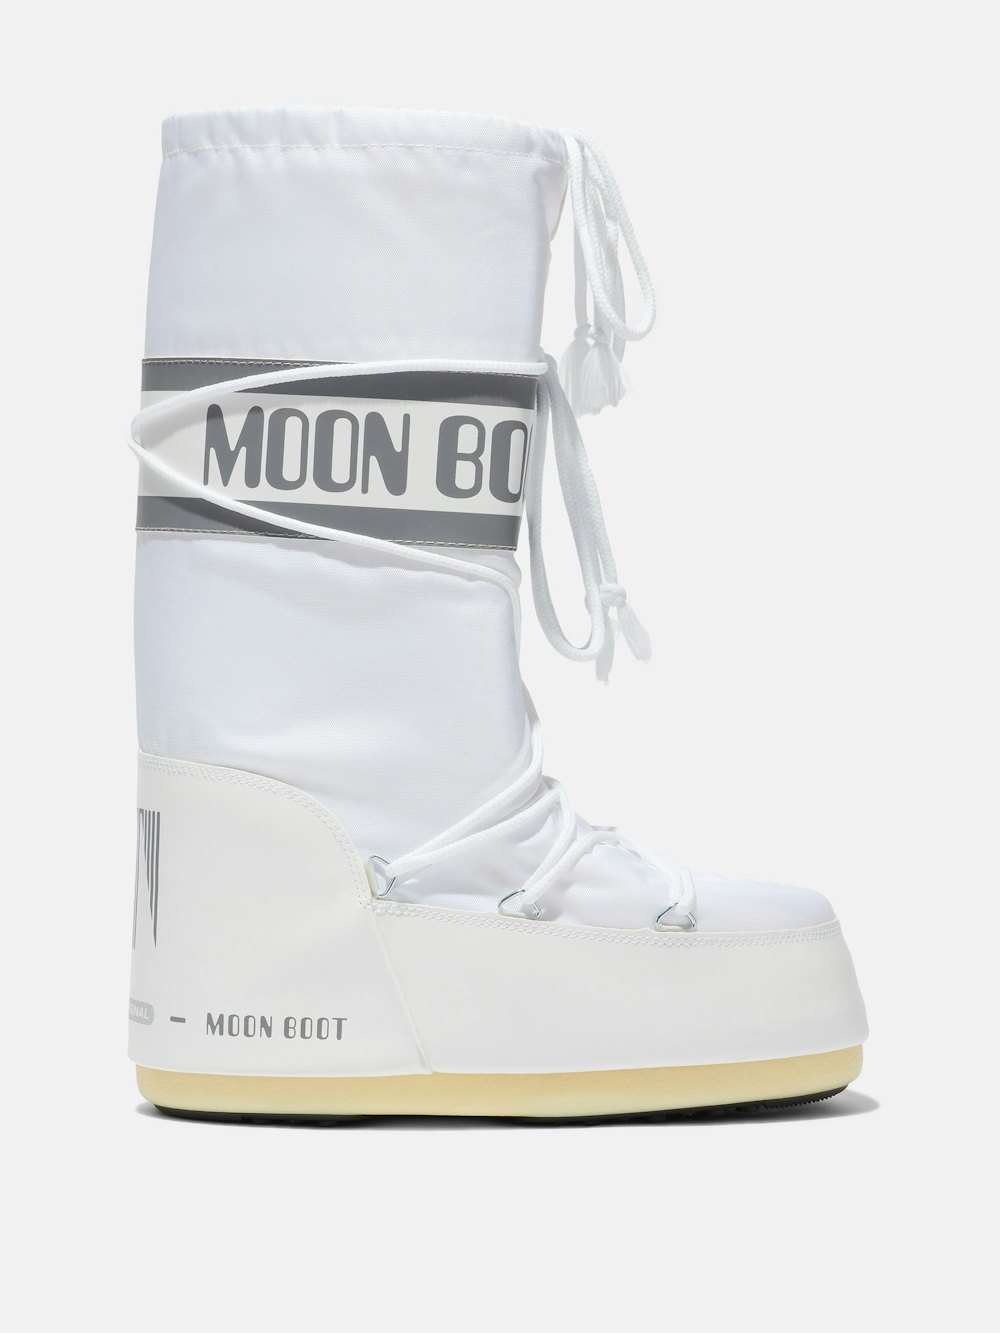 7 OUTFIT IDEAS WITH MOON BOOTS, WINTER'S “IT” ACCESSORY (NYLON